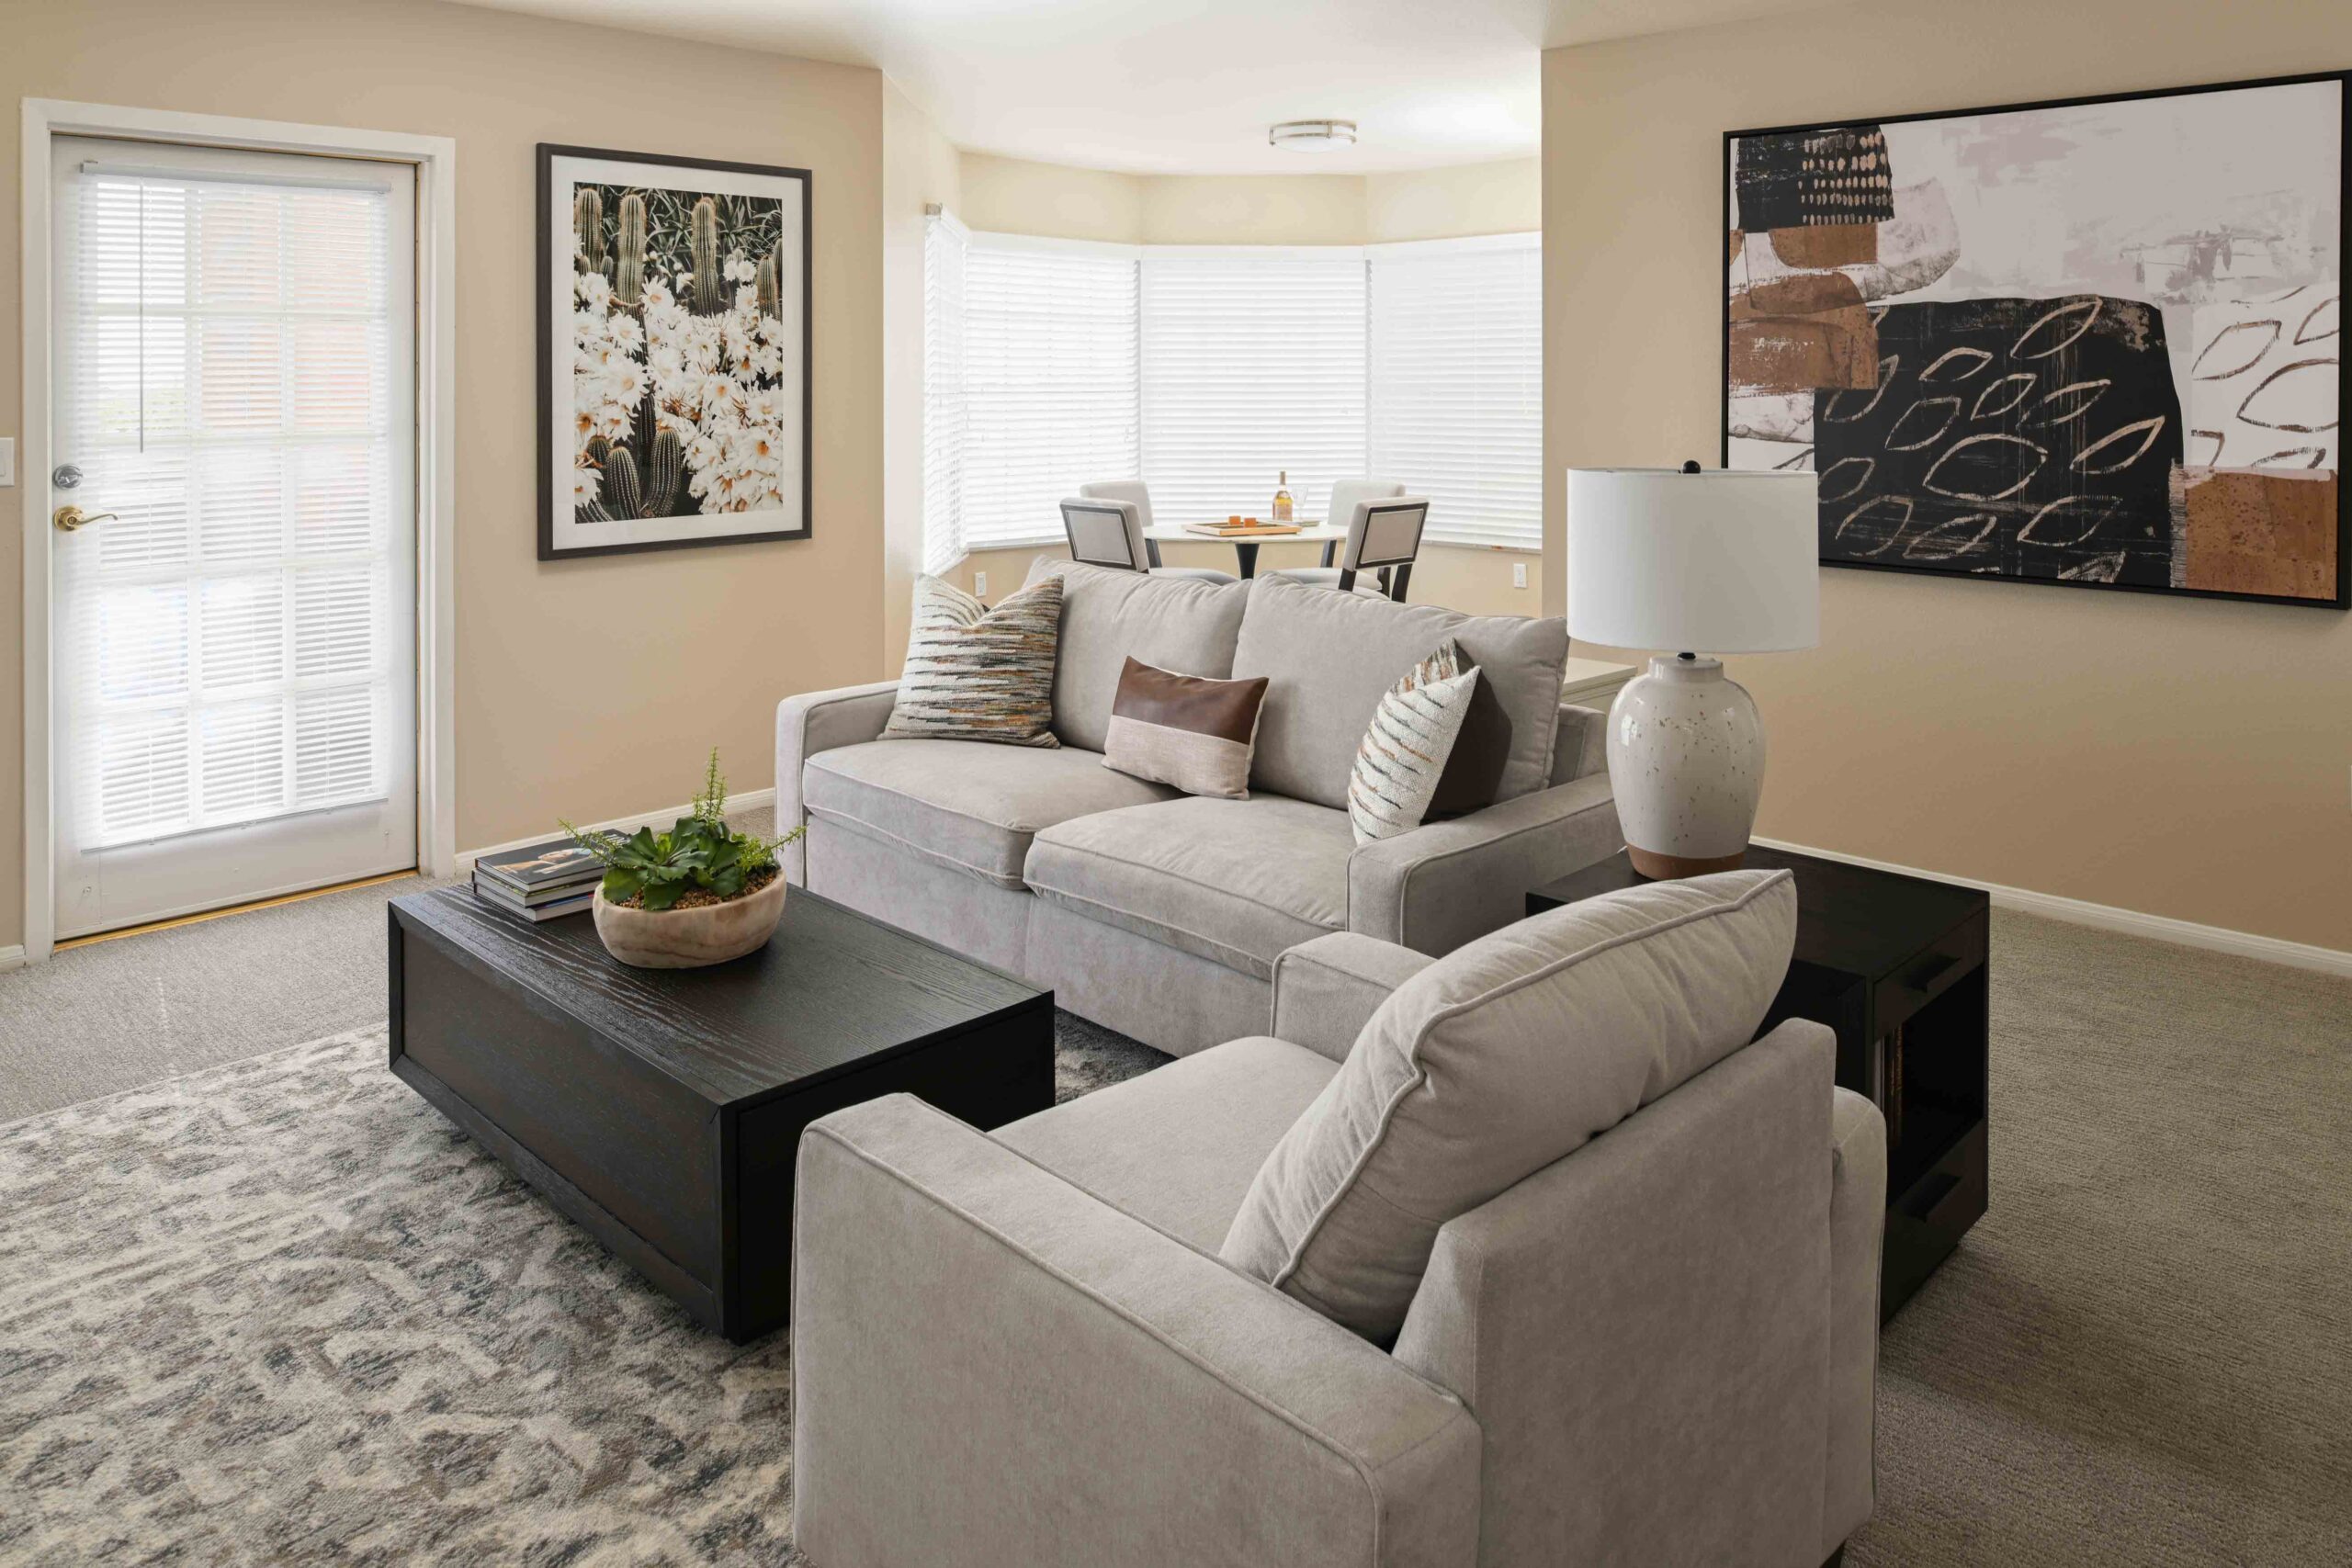 A cozy living room with a comfortable couch, a stylish coffee table, and a sleek television.